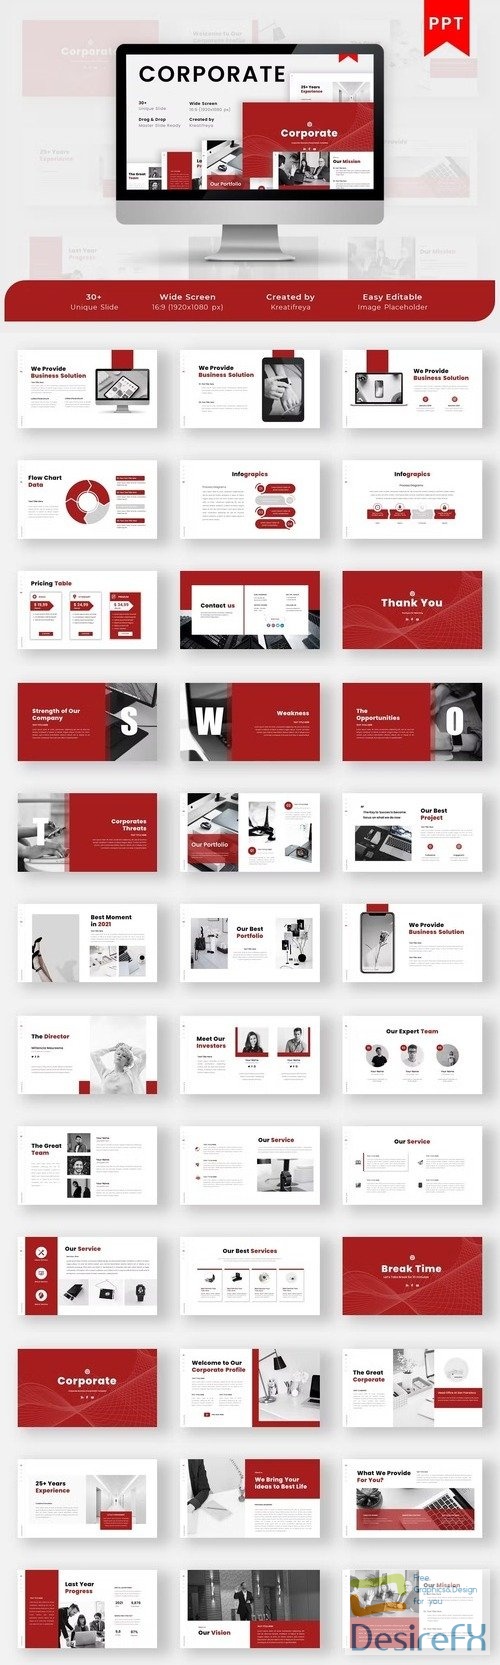 CORPORATE PowerPoint Template WANQUCG